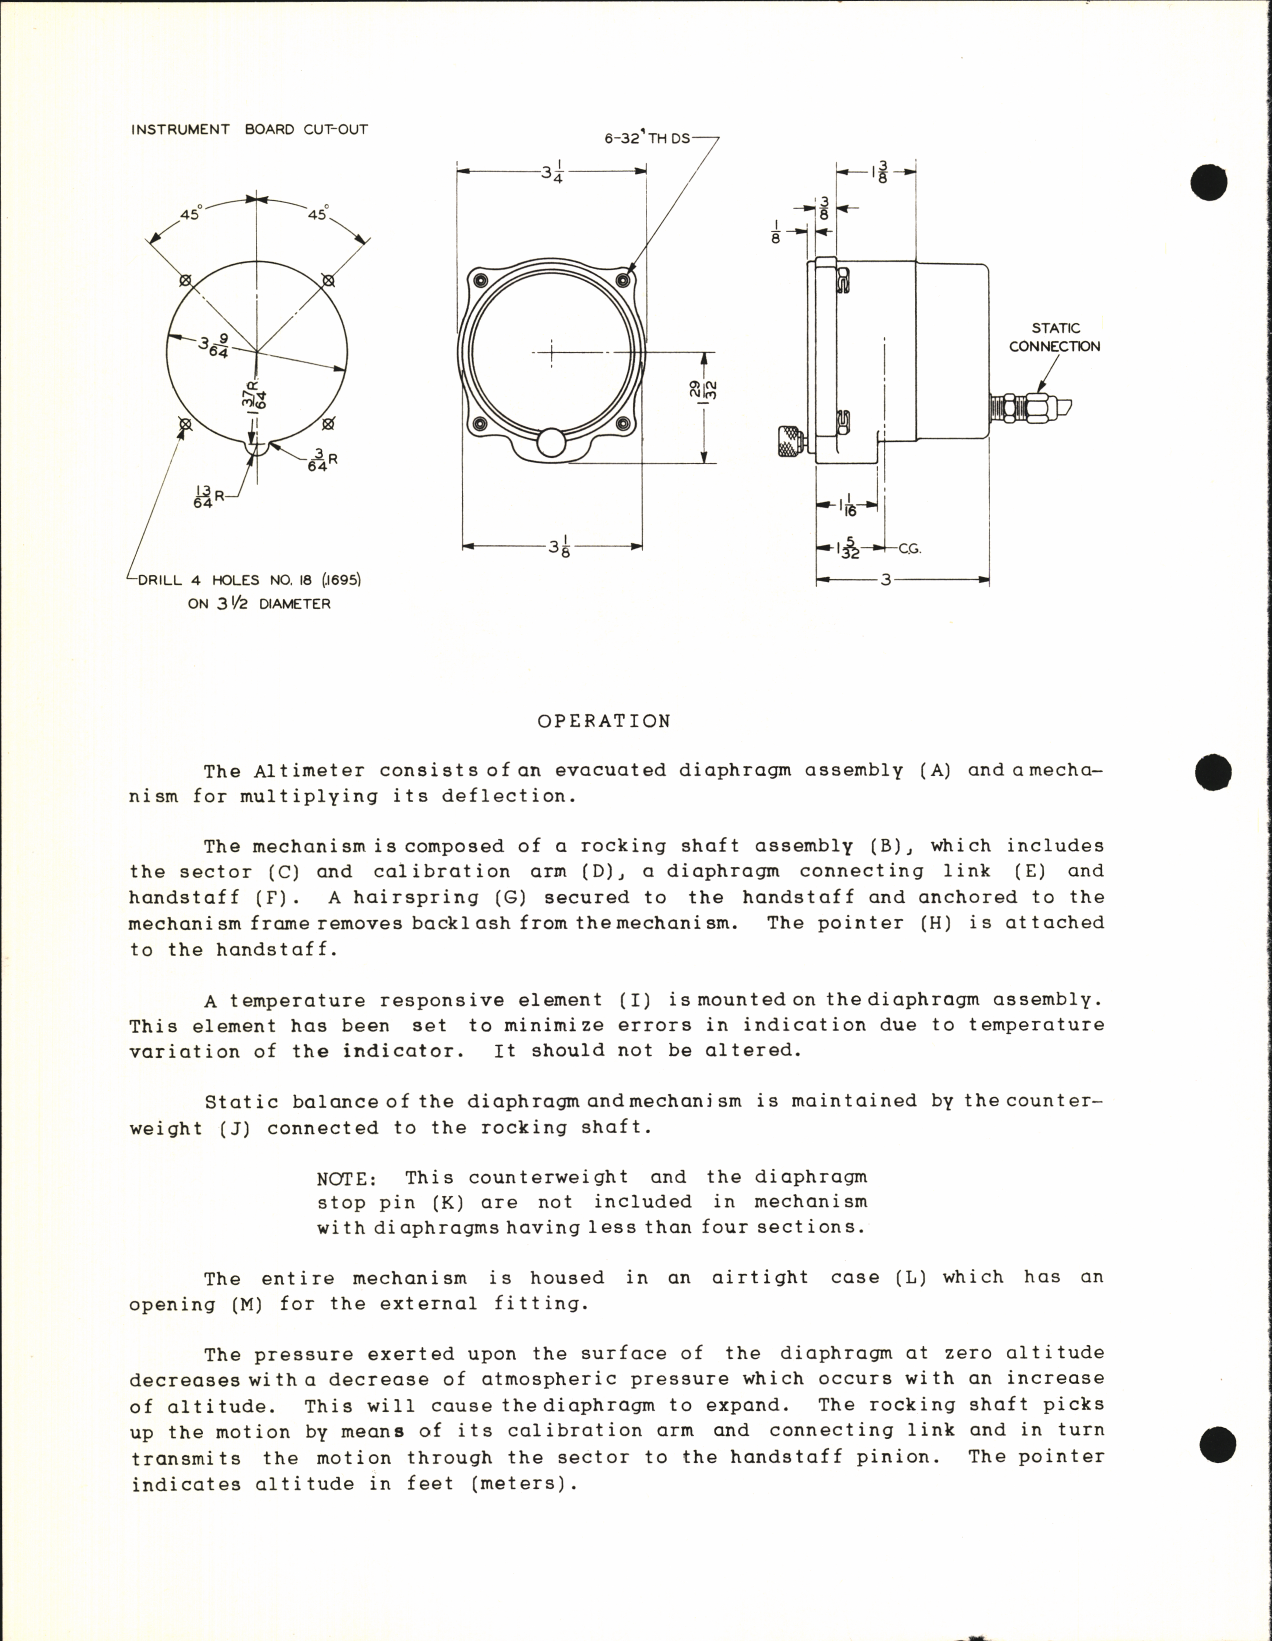 Sample page 8 from AirCorps Library document: Installation Instructions for Kollsman Aircraft Instruments